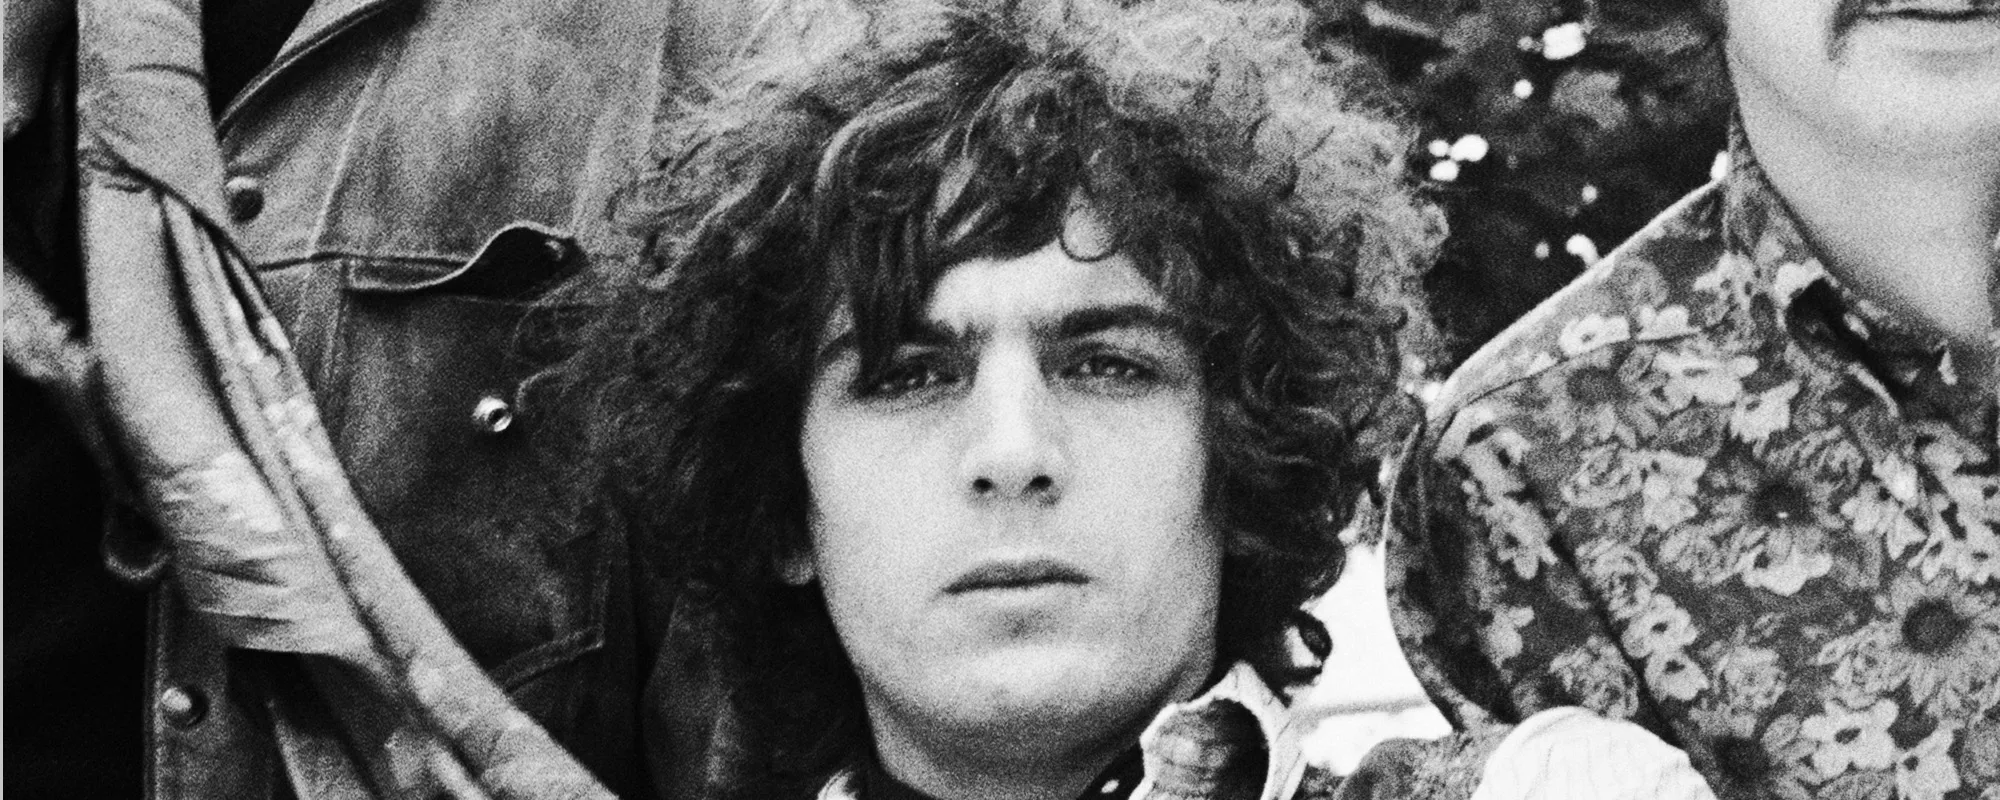 Watch: First Trailer for Syd Barrett Documentary ‘Have You Got It Yet?’